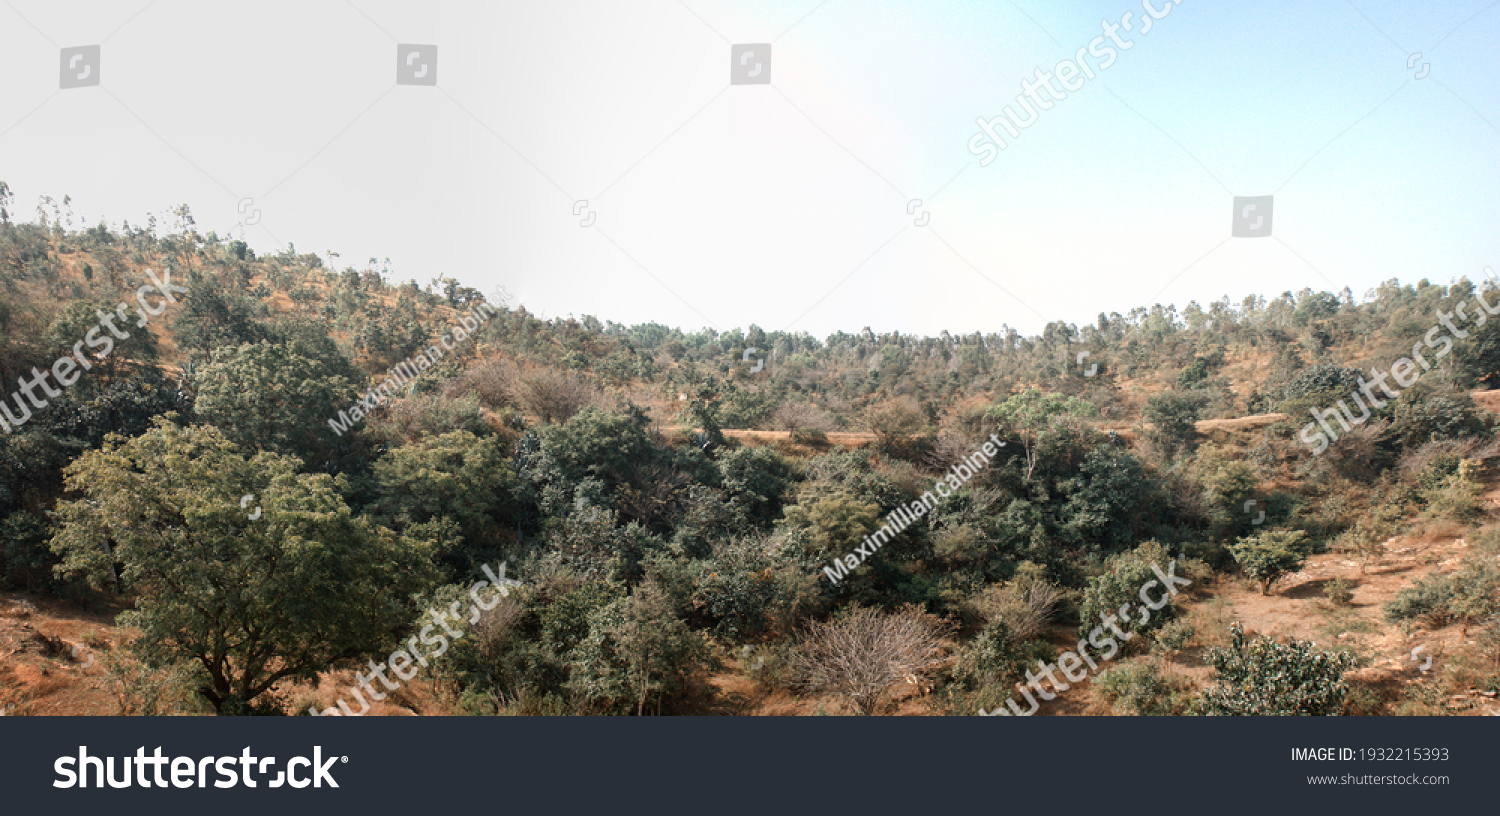 Dry hills and scrub (evergreen sclerophyllous bush formation) in the area of the Deccan plateau, India #1932215393